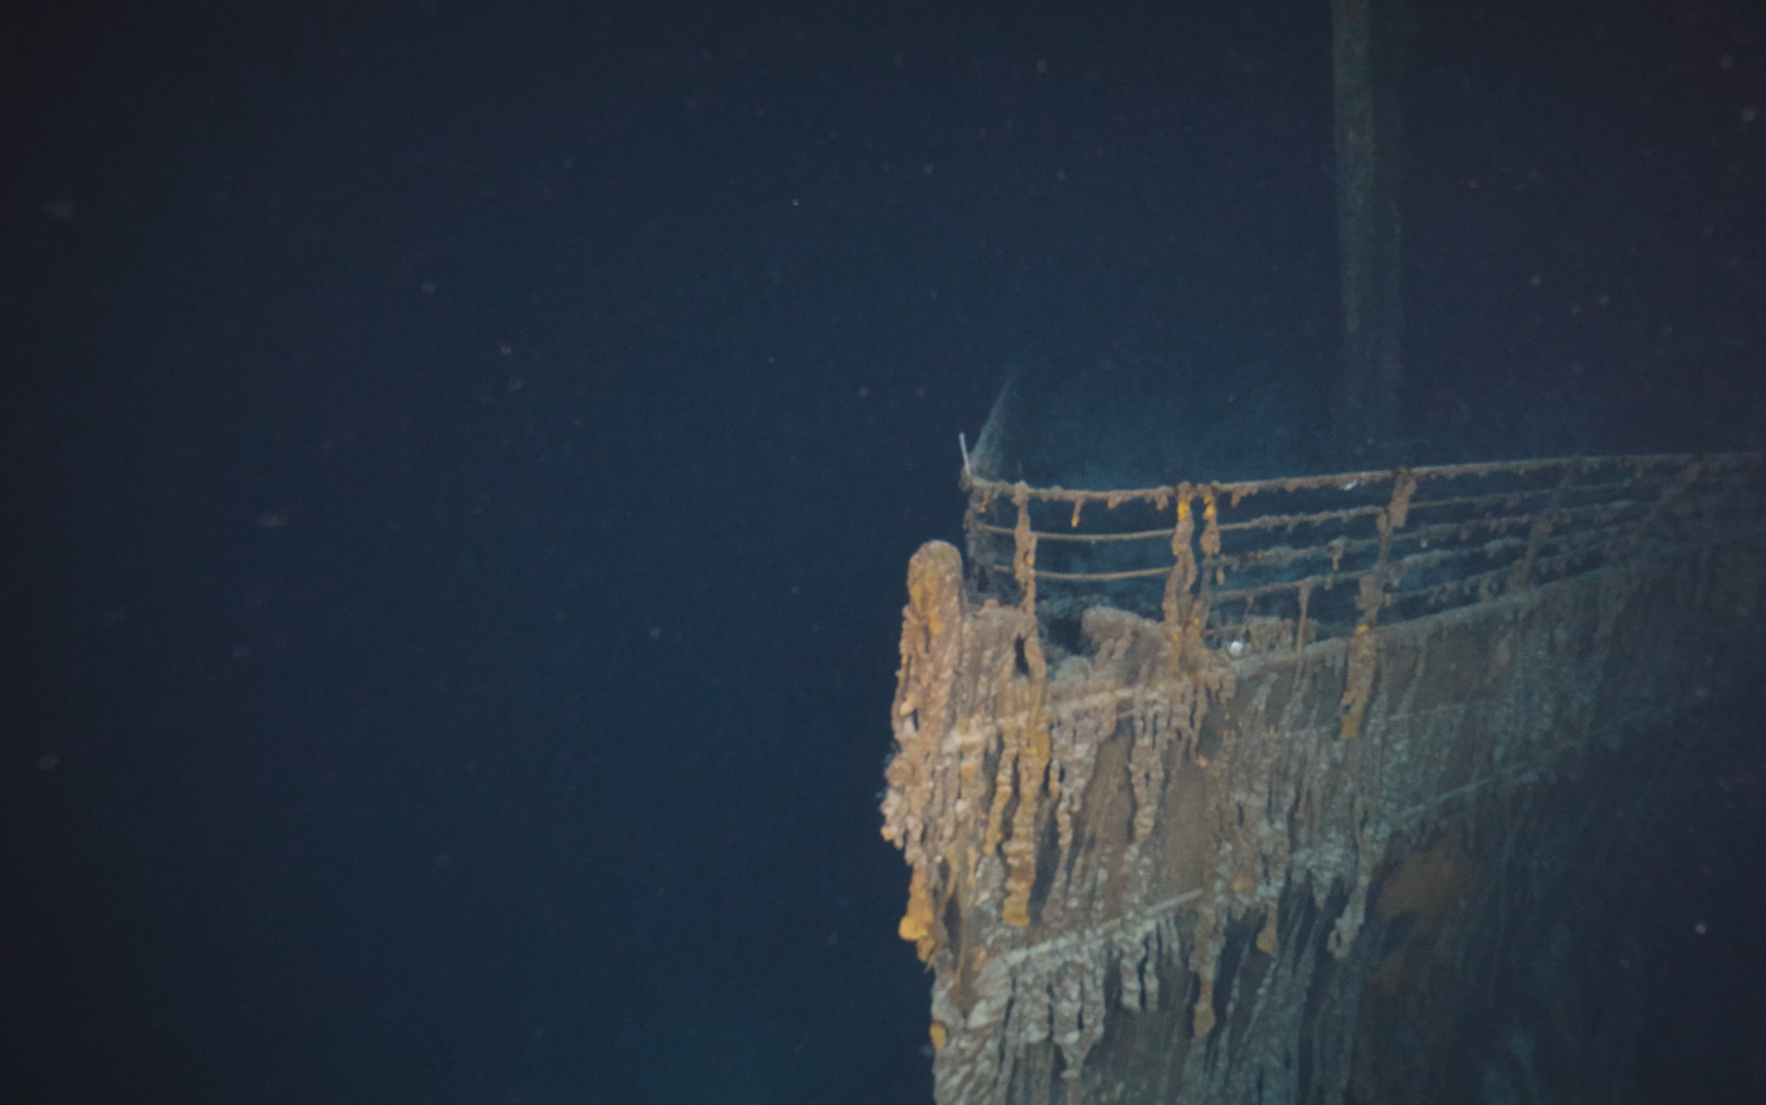 High quality film shows detail on Titanic shipwreck for 1st time. The Times of Israel